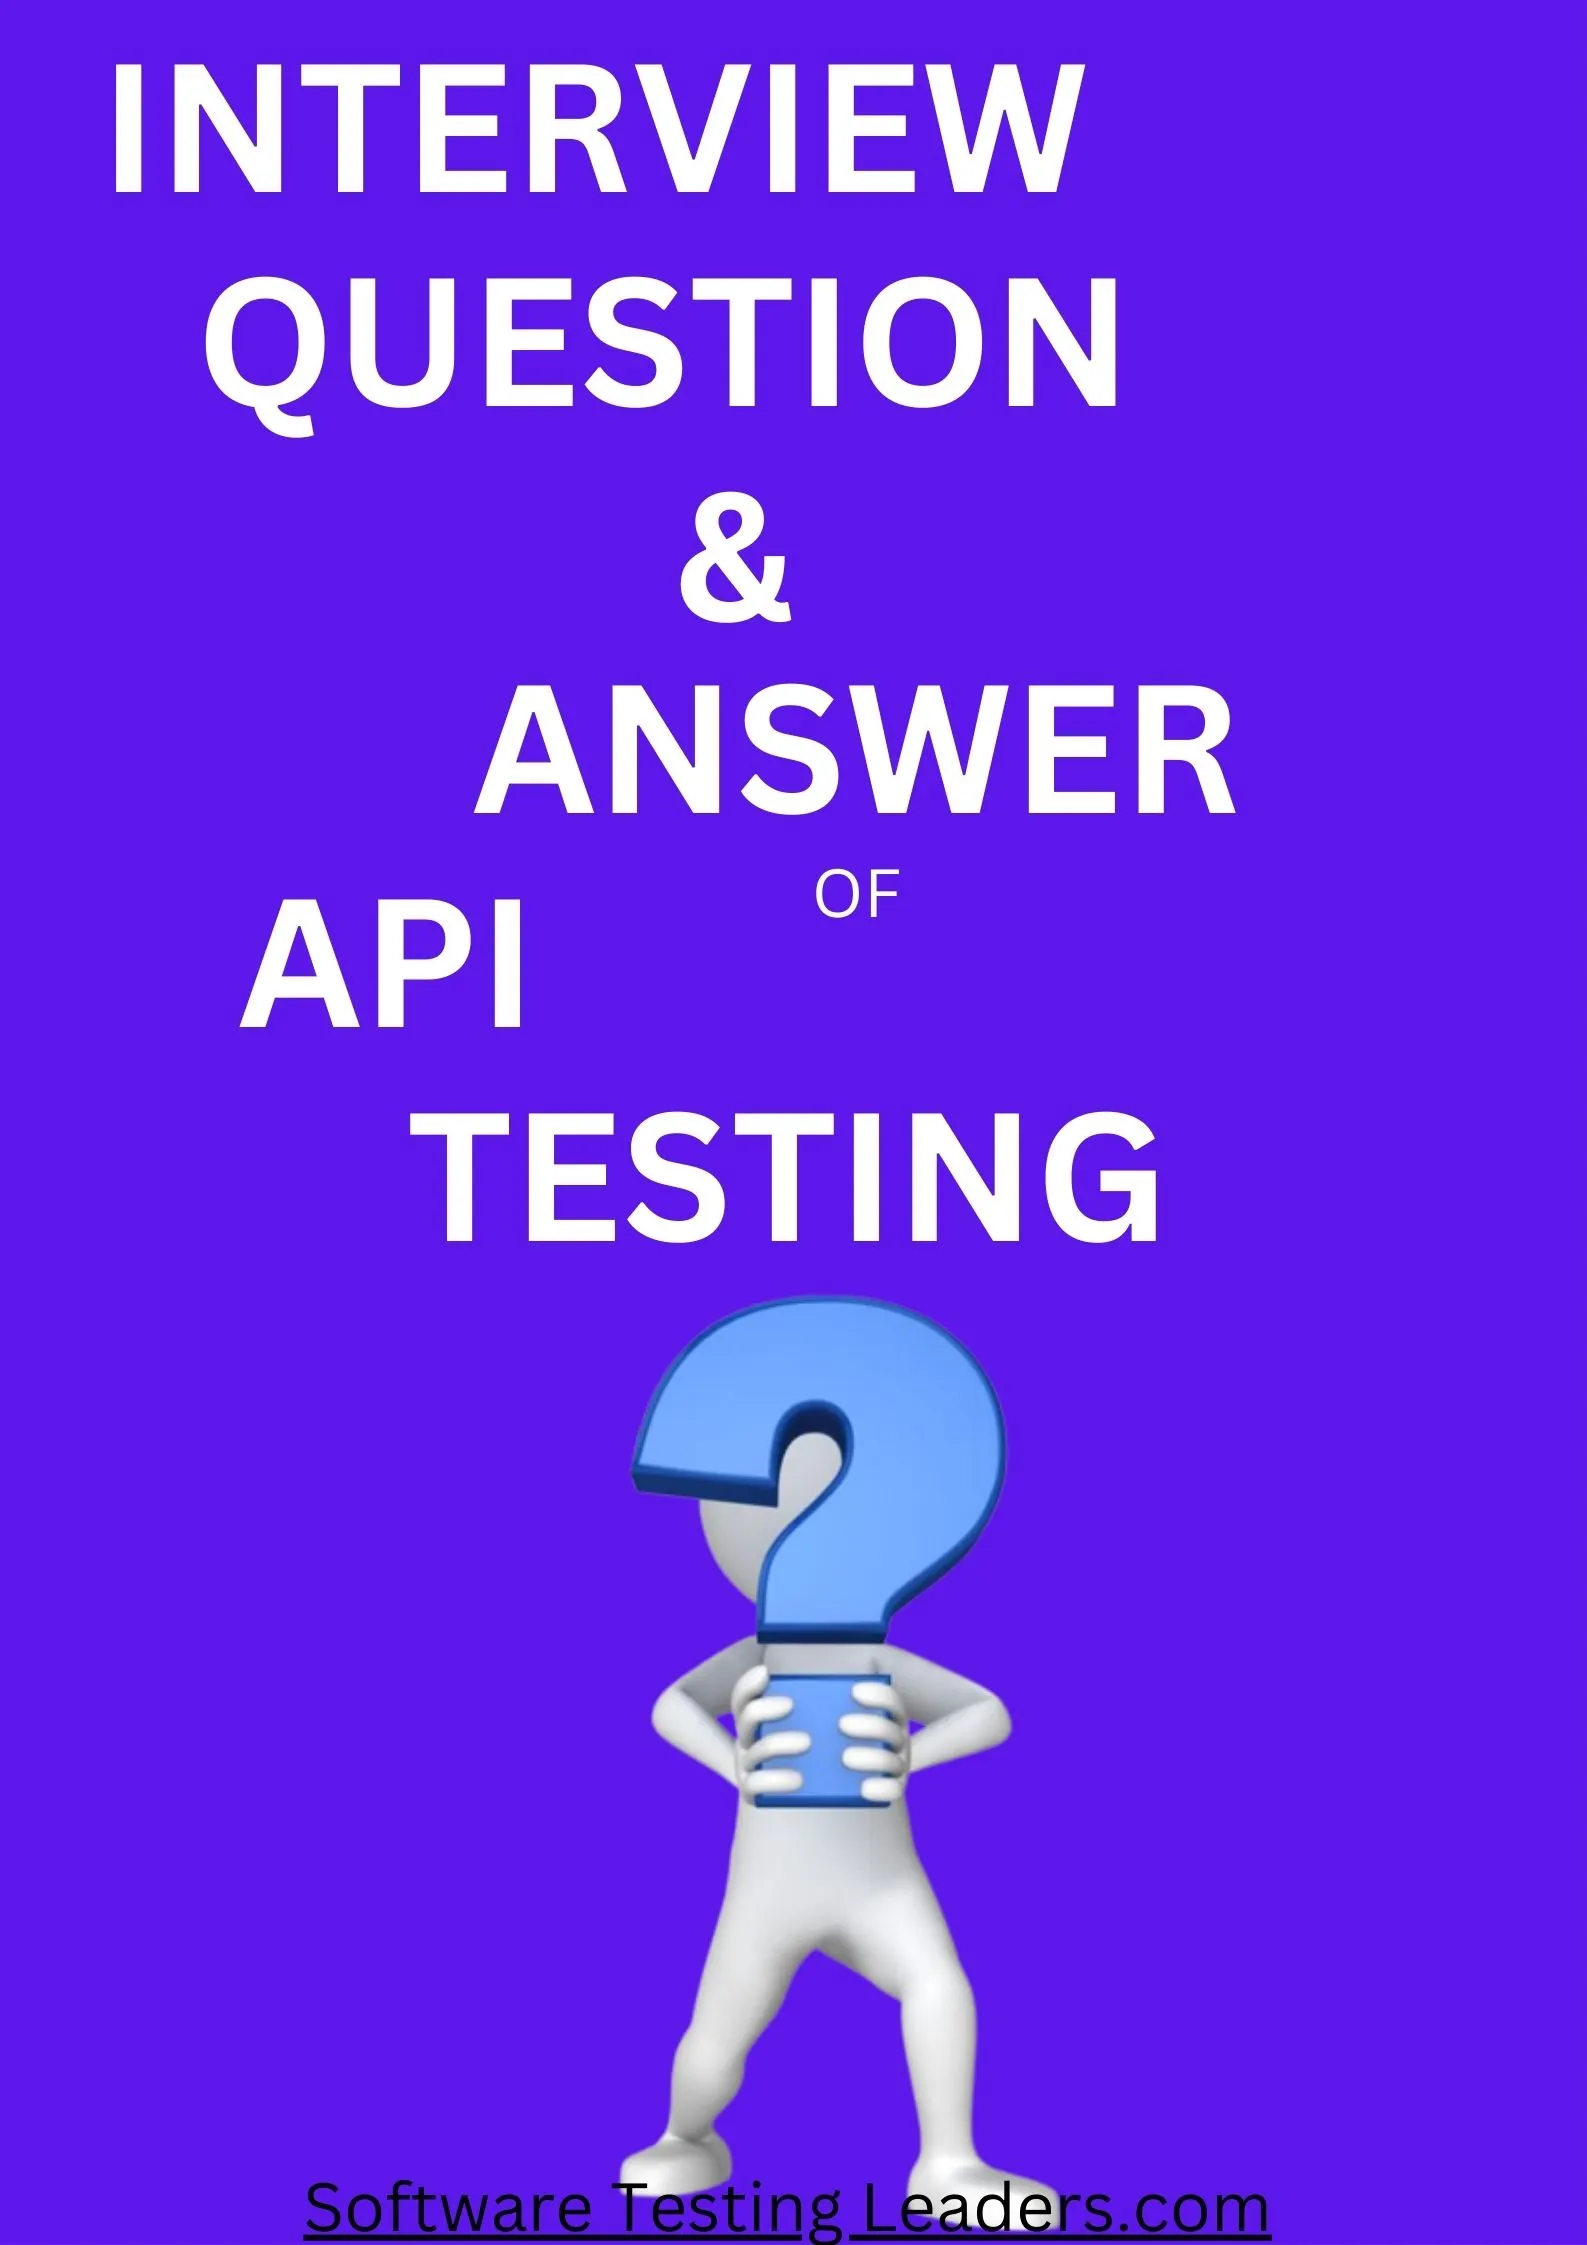 INTERVIEW QUESTION & ANSWER OF API TESTING